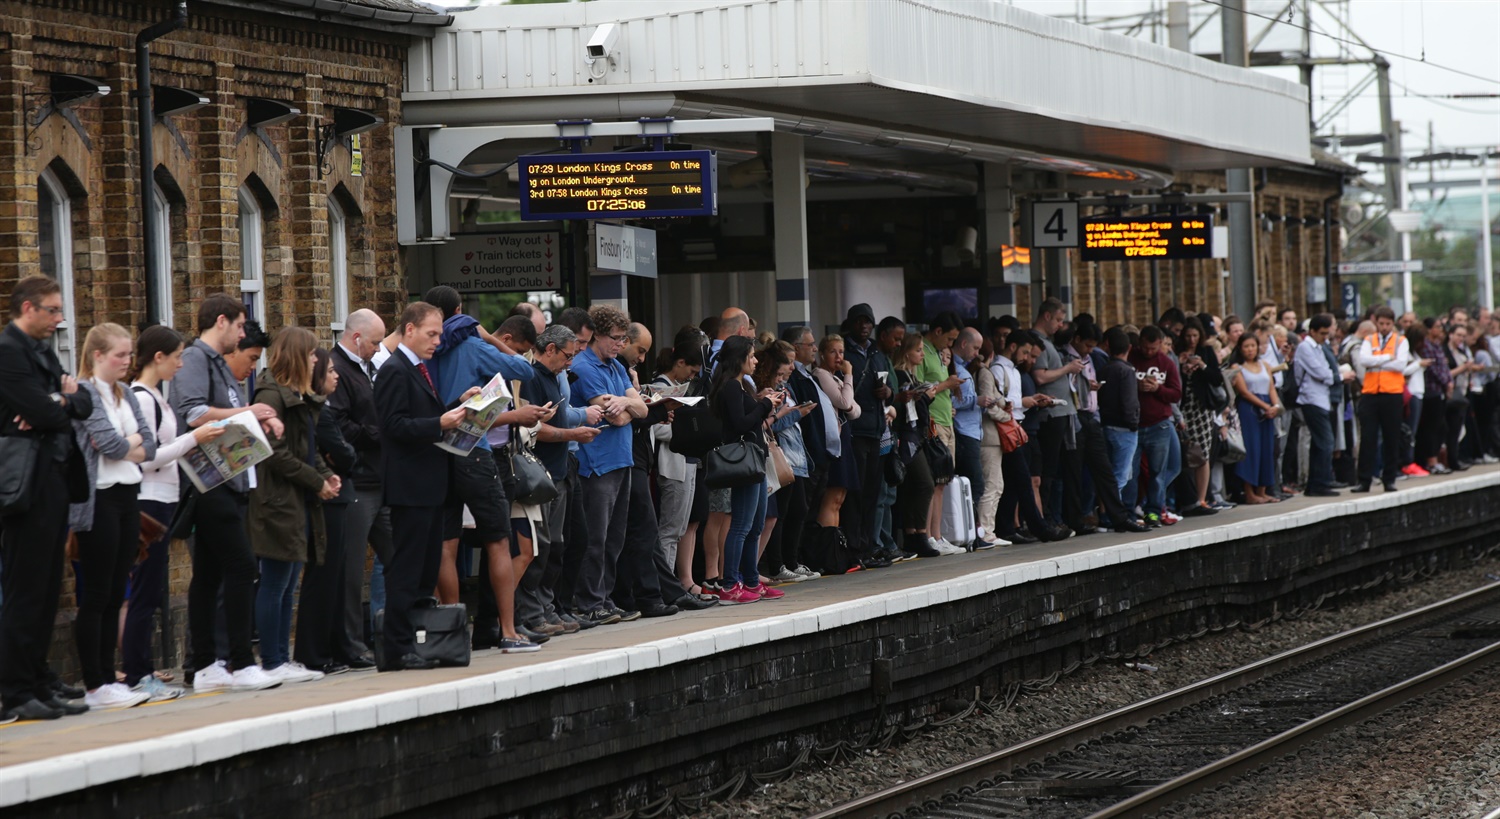 Watchdog forced to postpone closure of London Overground ticket offices after ‘unprecedented and overwhelming’ response